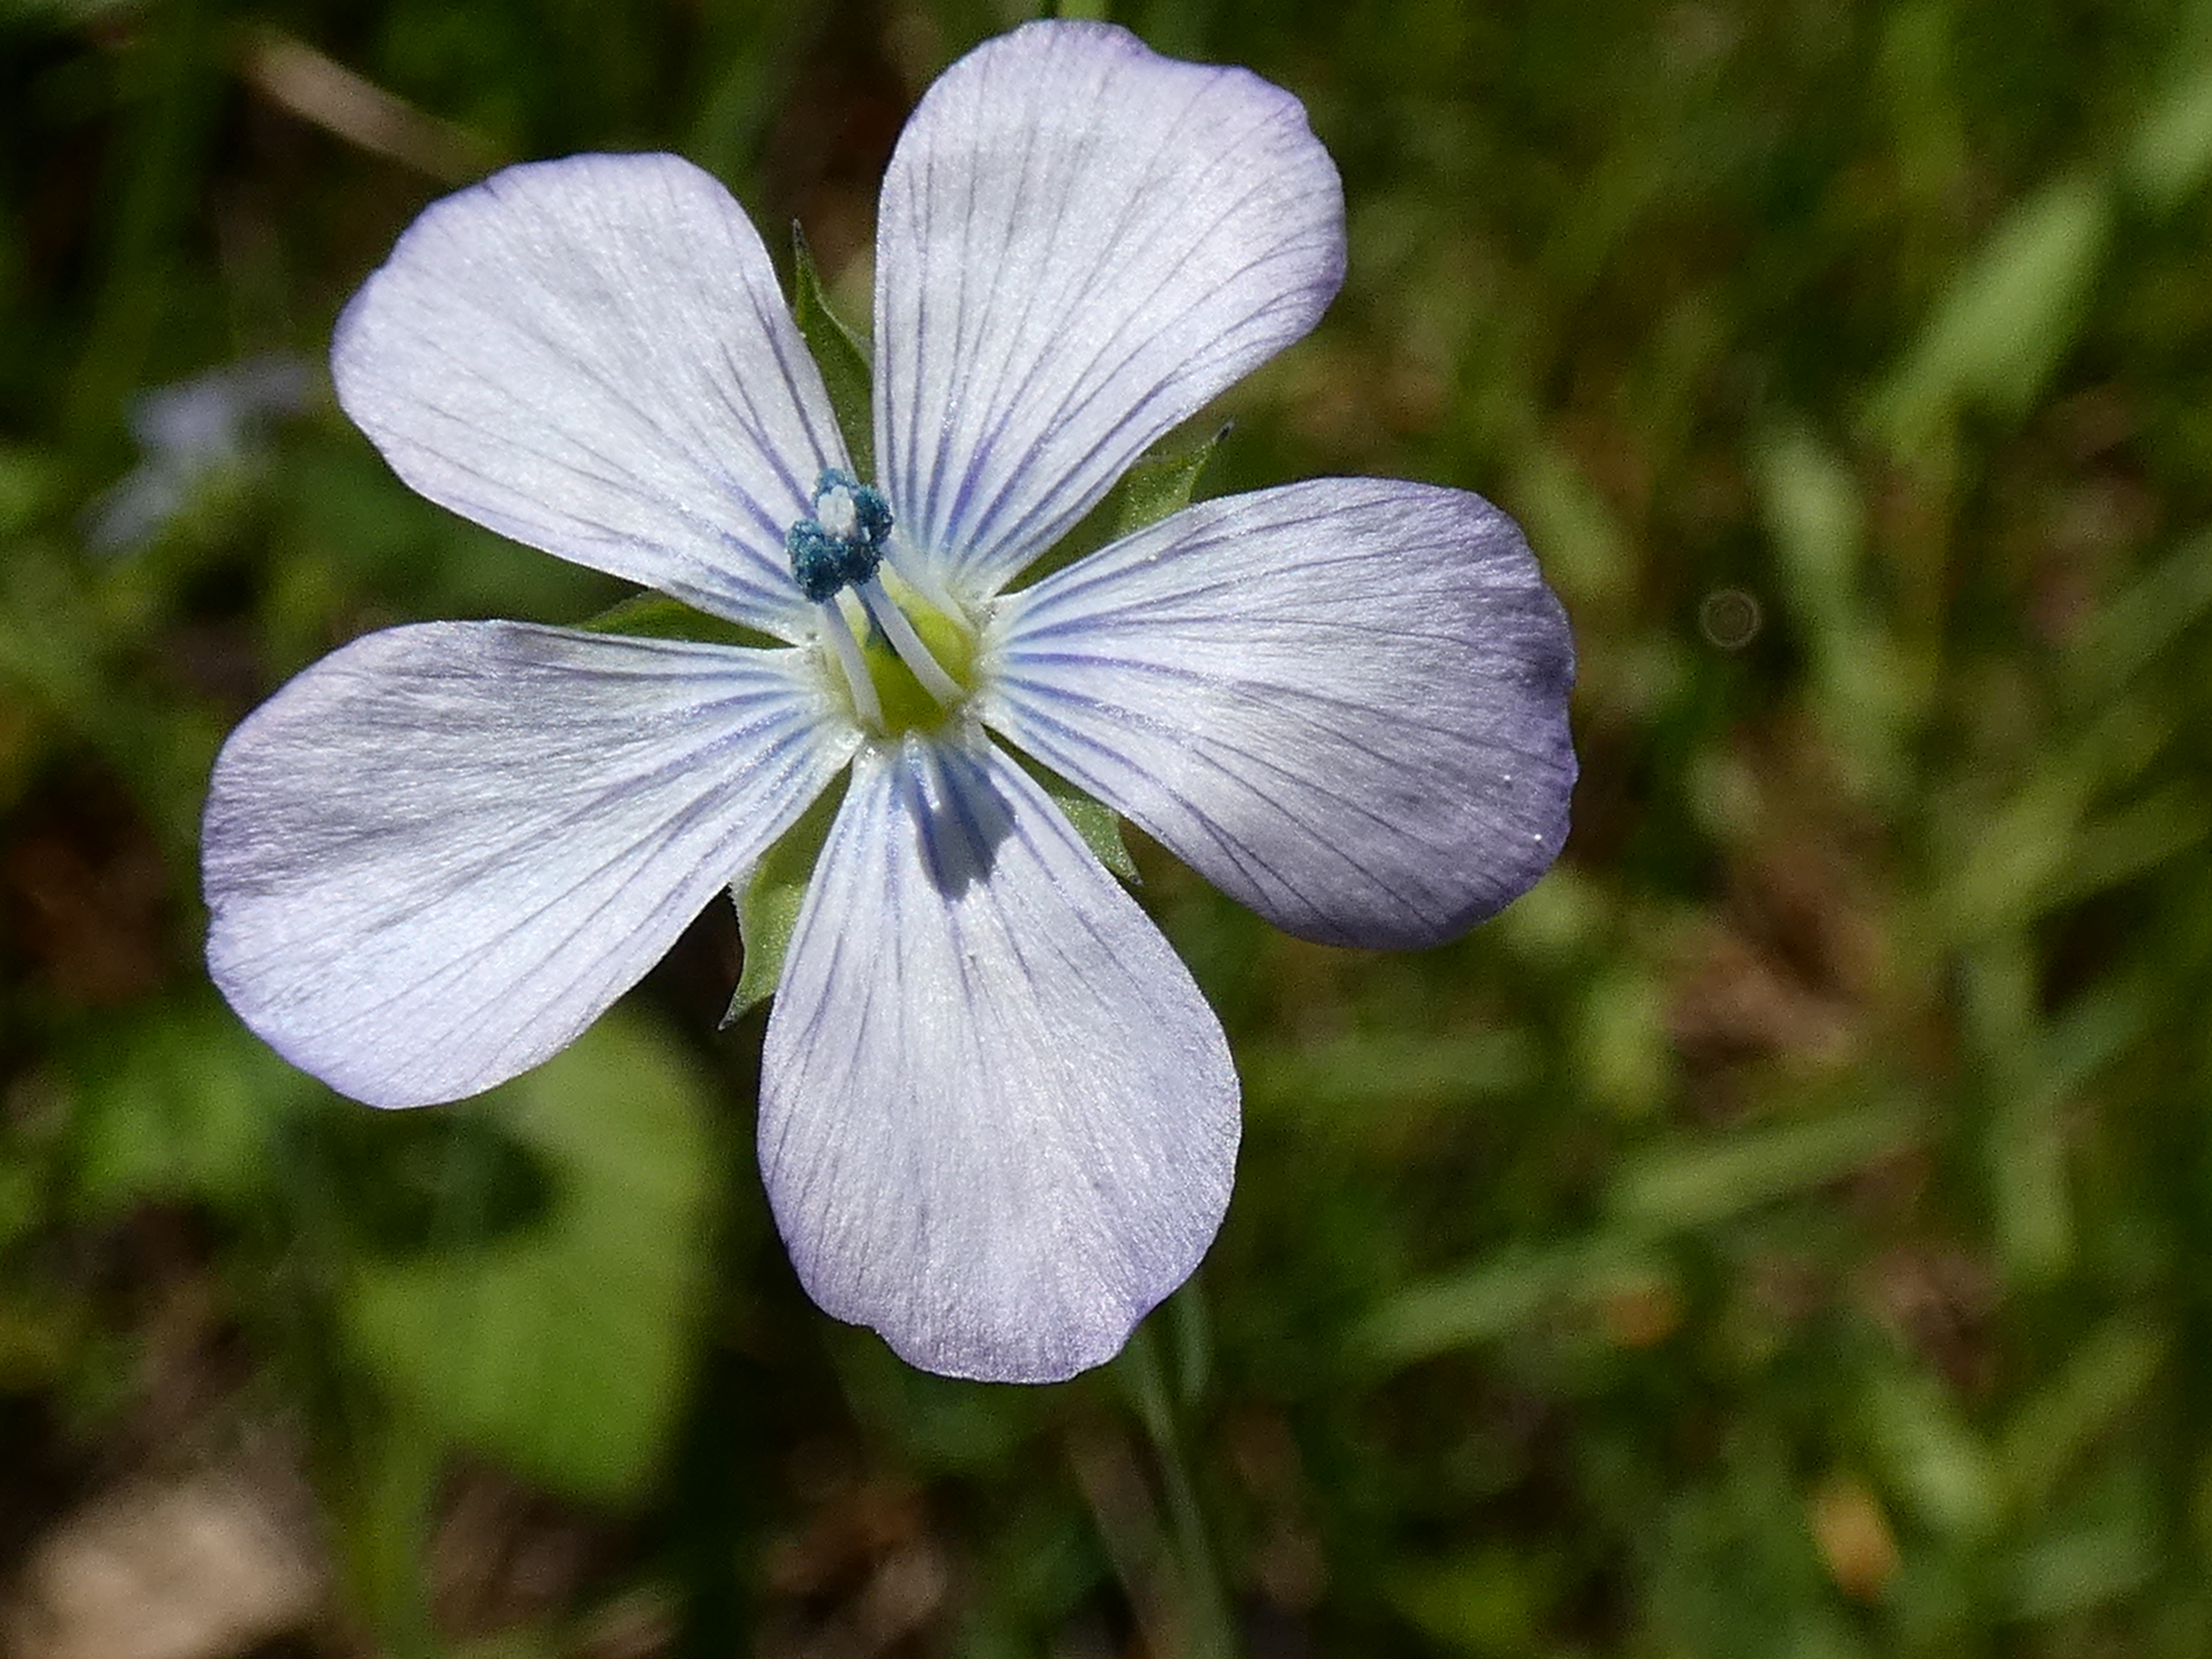 A Flax flower that is 5-merous